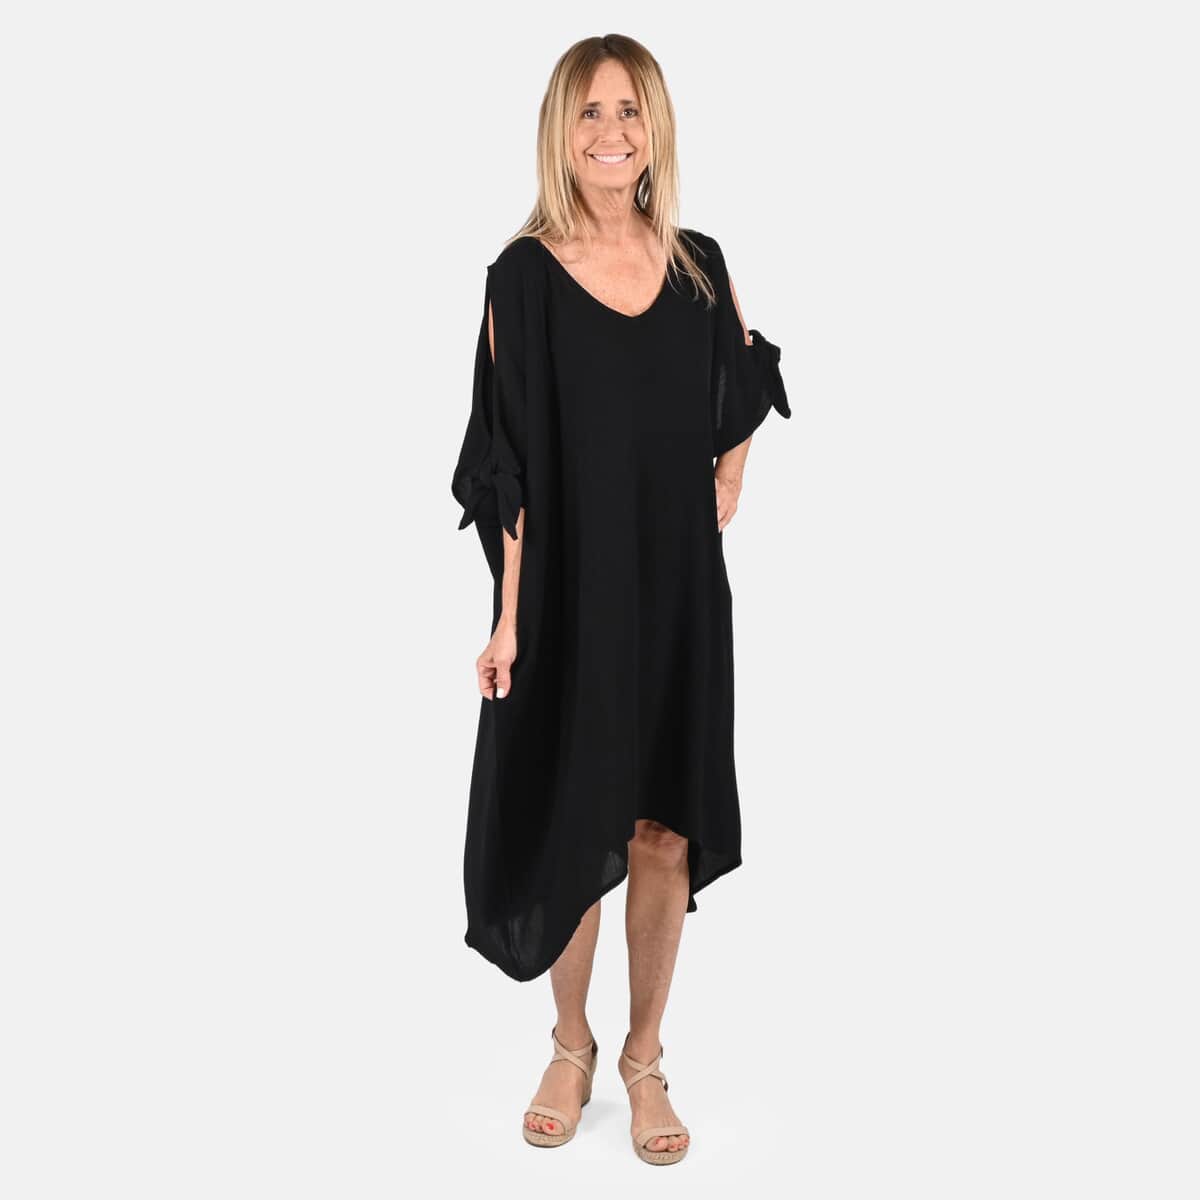 Tamsy Black V-Neck Dress with Tie Sleeves - One Size Fits Most image number 0